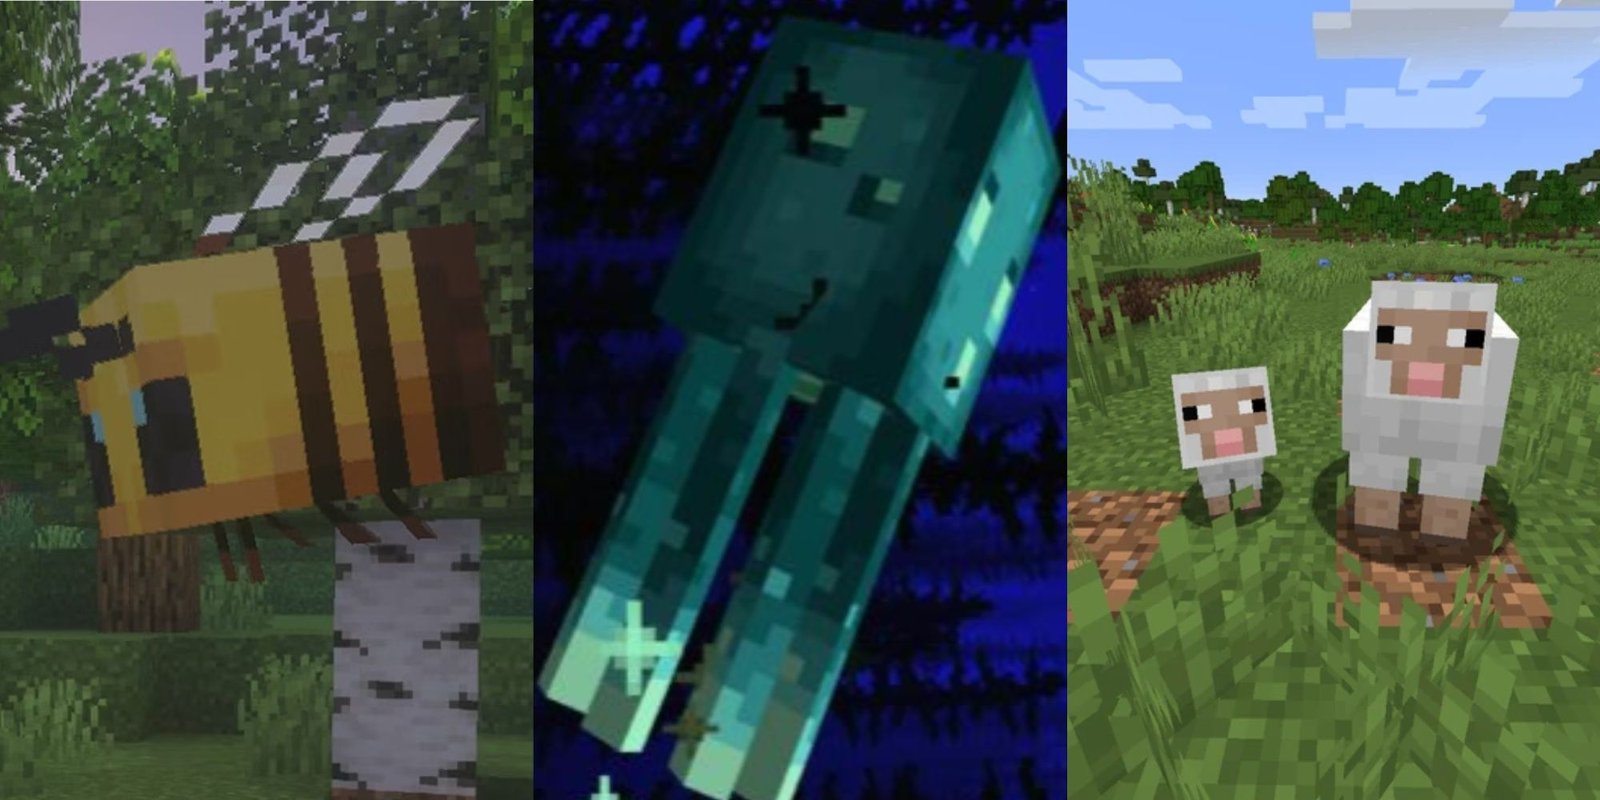 three mobs that spawn in Minecraft's Cherry Groves: bees, glow squids, and sheep